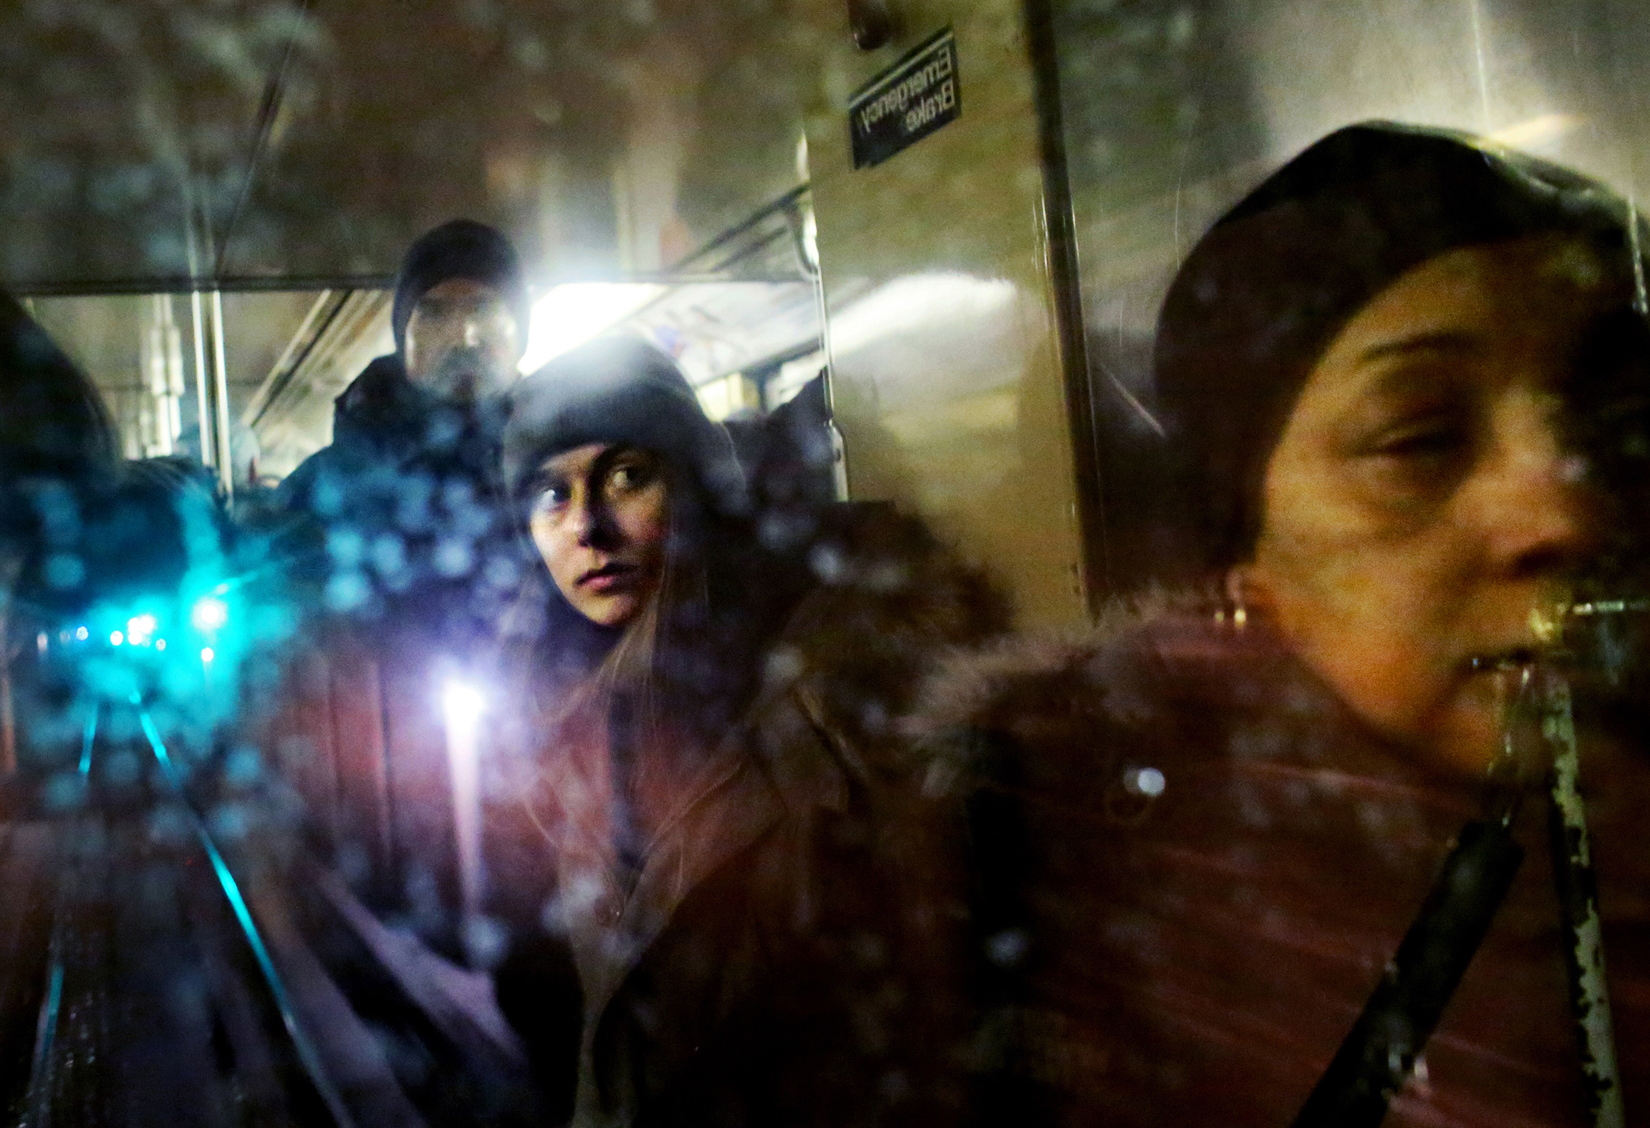 Aude Back de Surany, center, and other passengers are reflected in the back window of an uptown C train traveling through a subway tunnel in New York, New York on January 30, 2015. (For The New York Times)